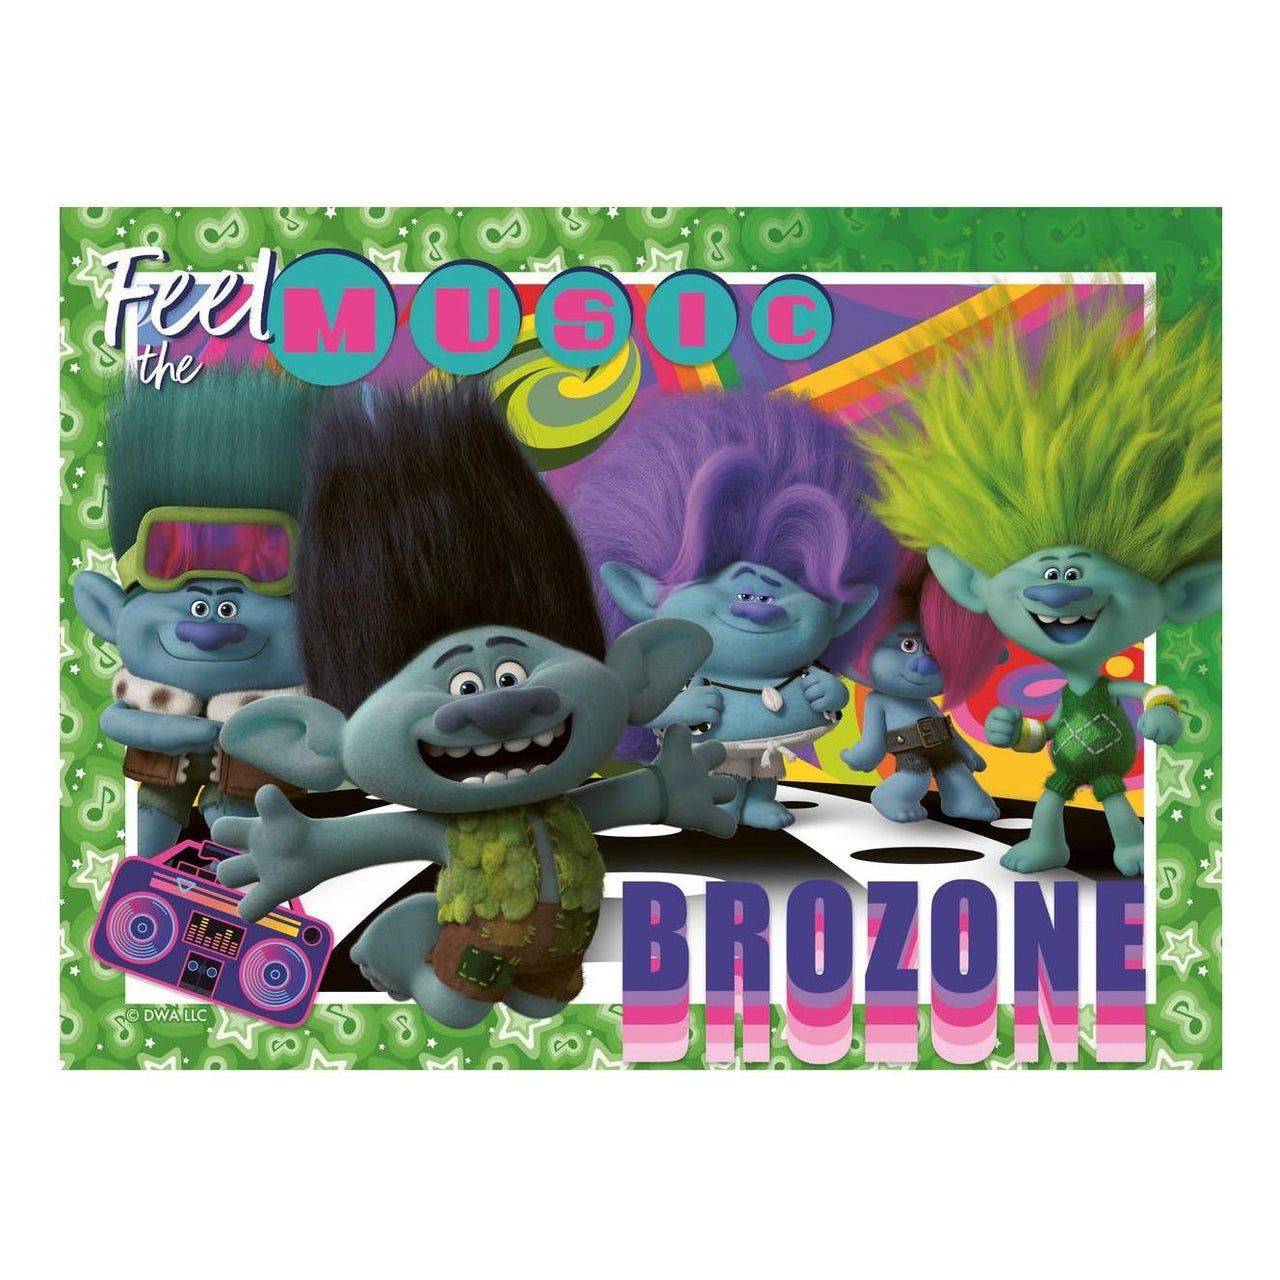 Trolls Band Together 4 in a Box Jigsaw Puzzle Ravensburger